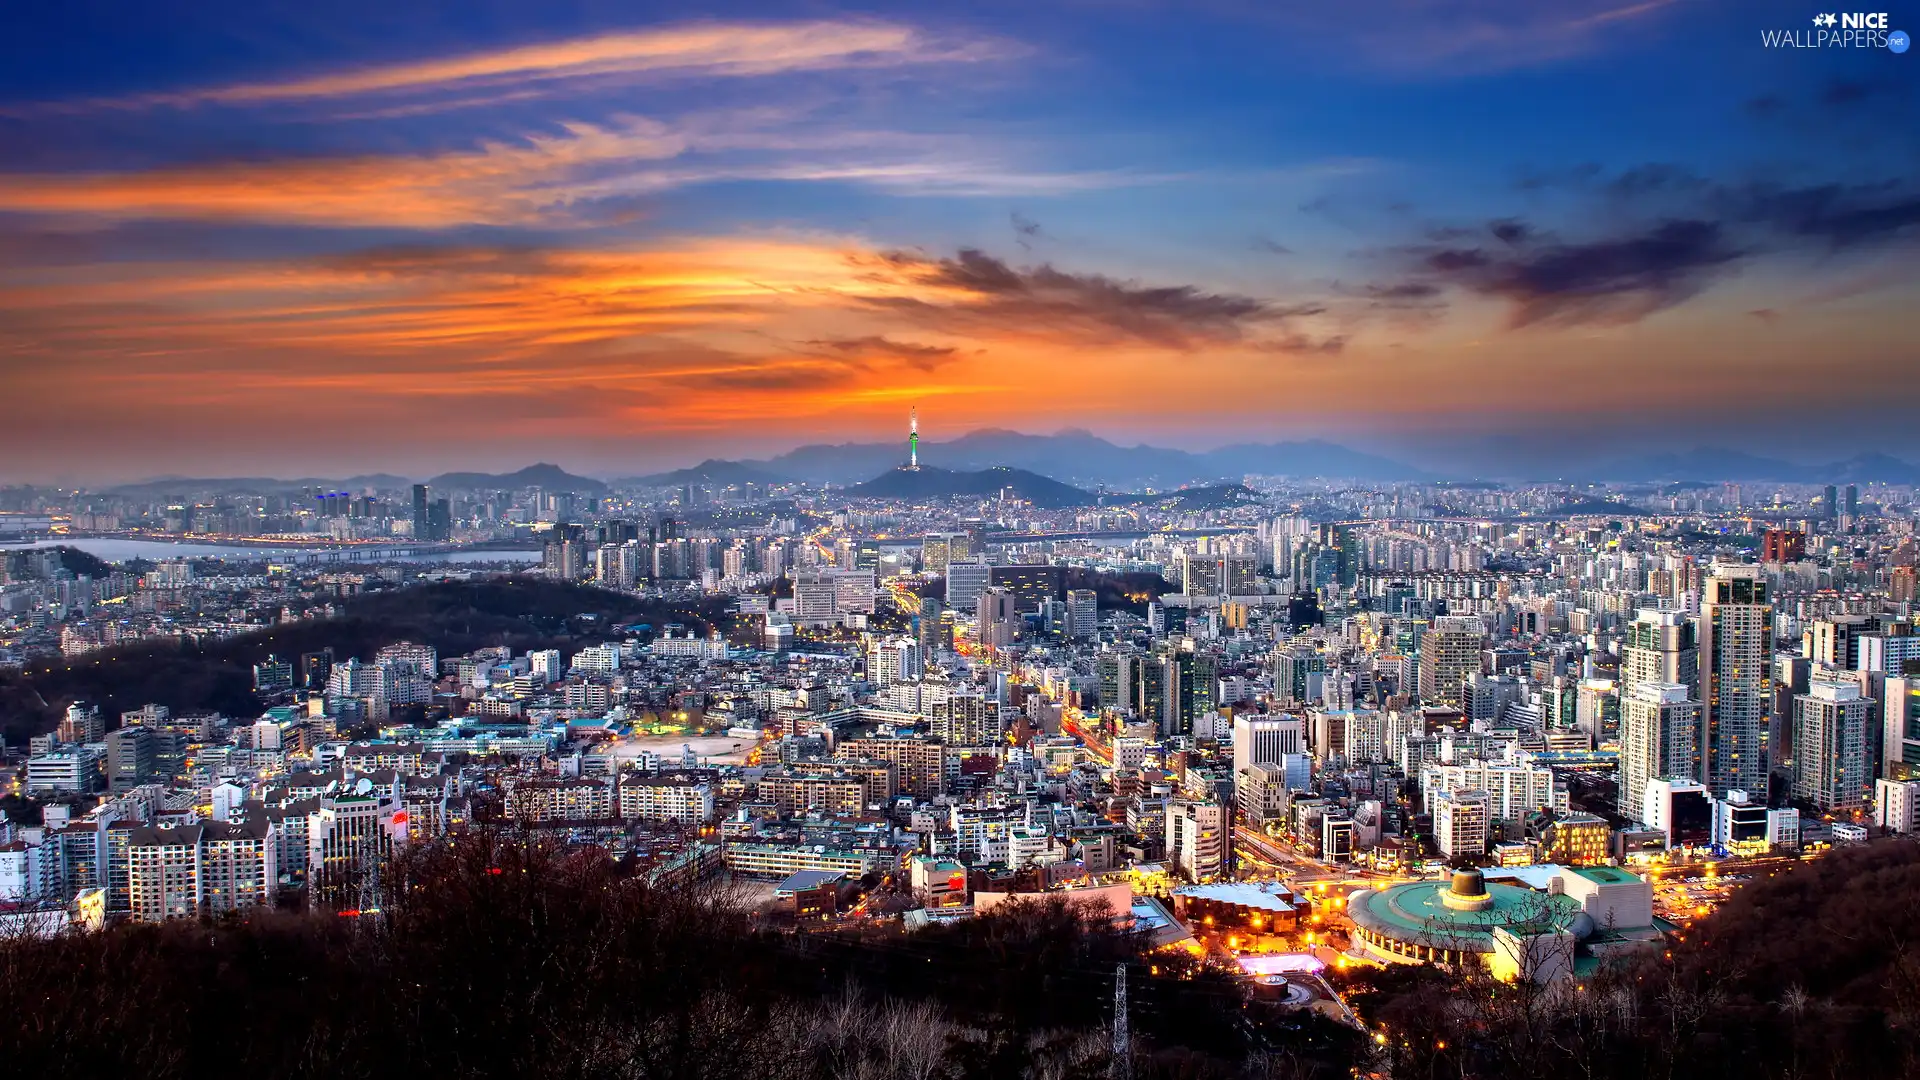 Houses, Great Sunsets, Seul, Town, South Korea